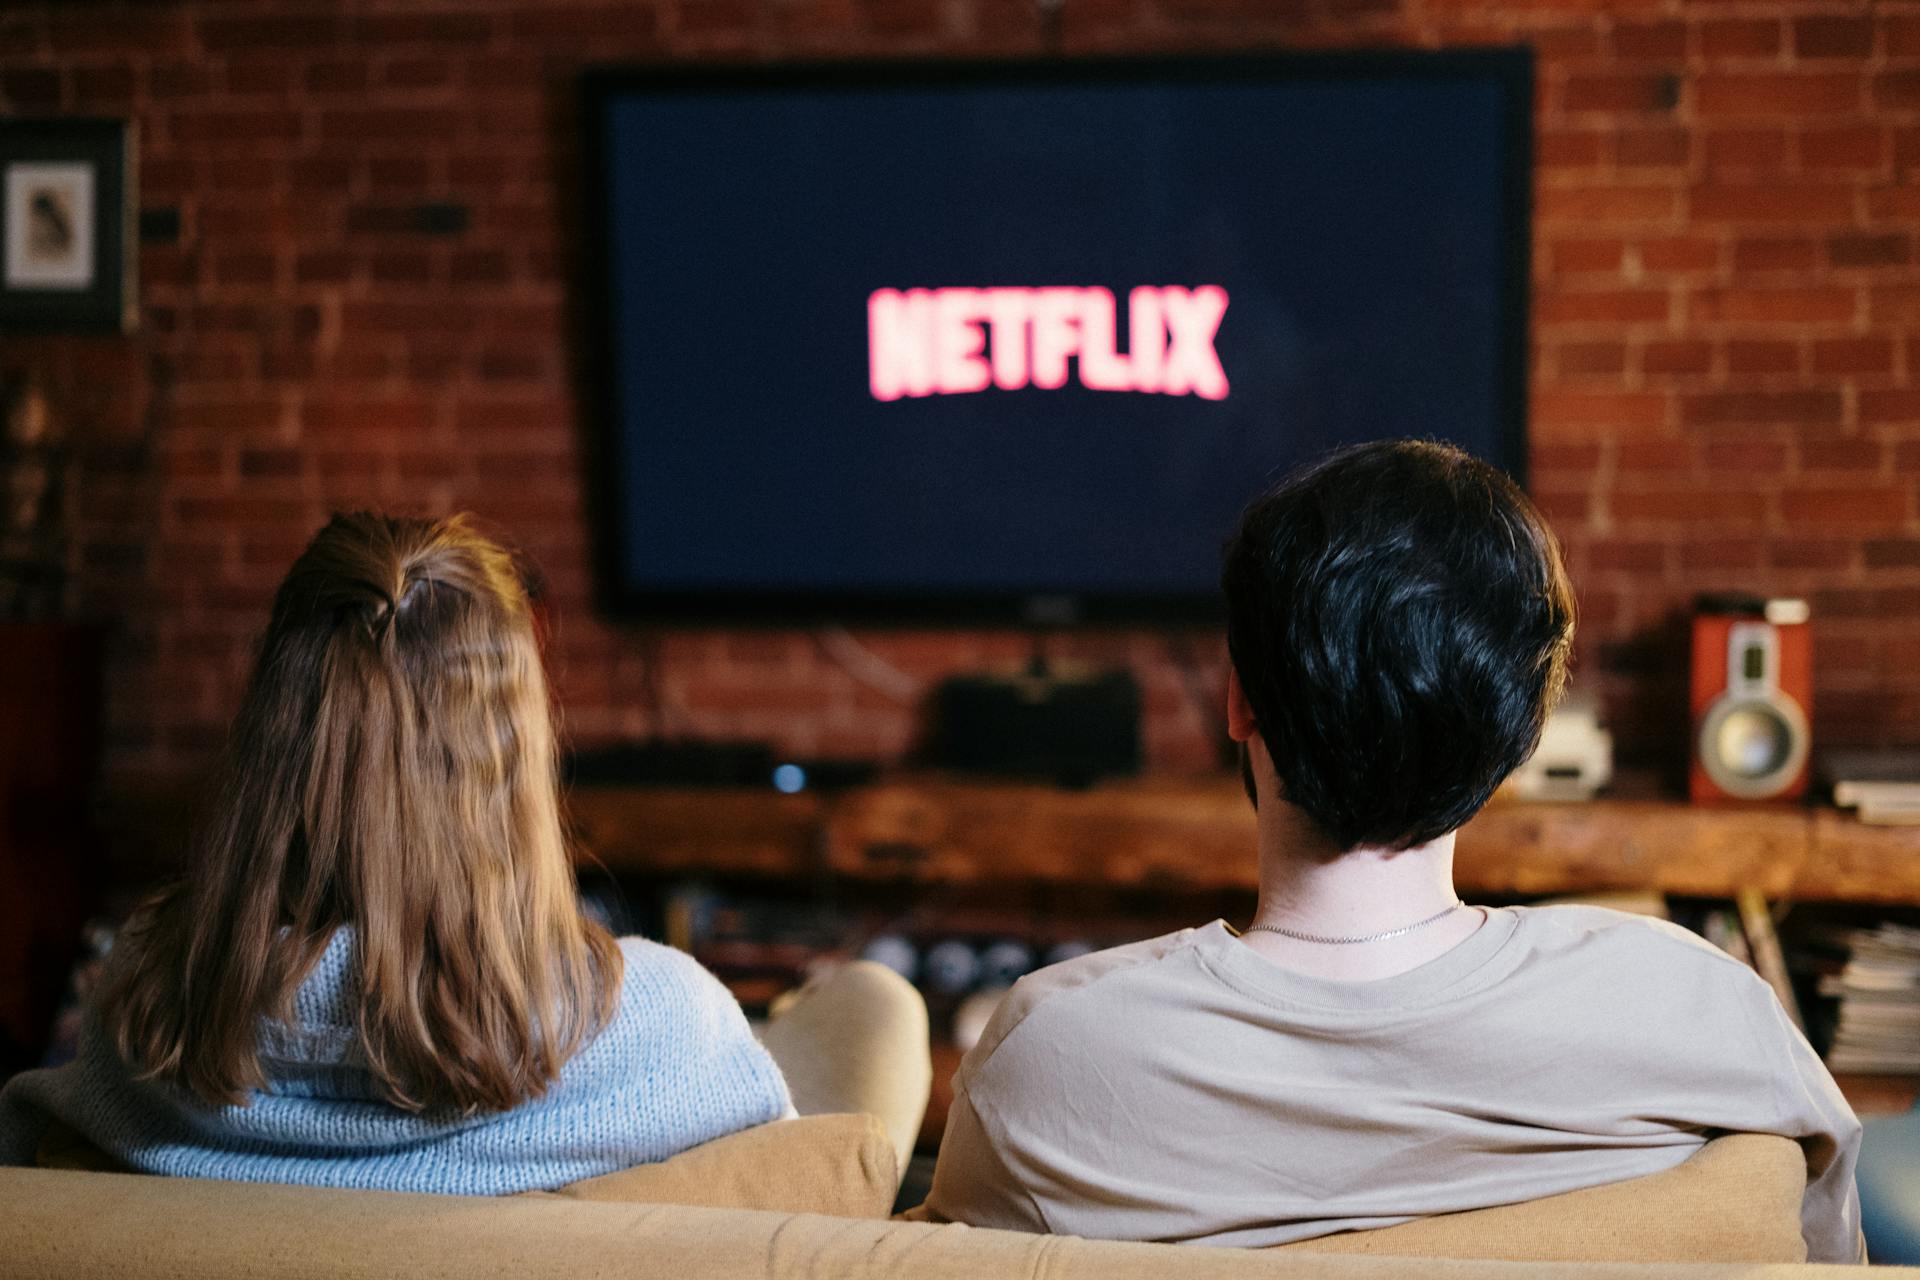 A couple sitting on a couch watching Netflix | Source: Pexels